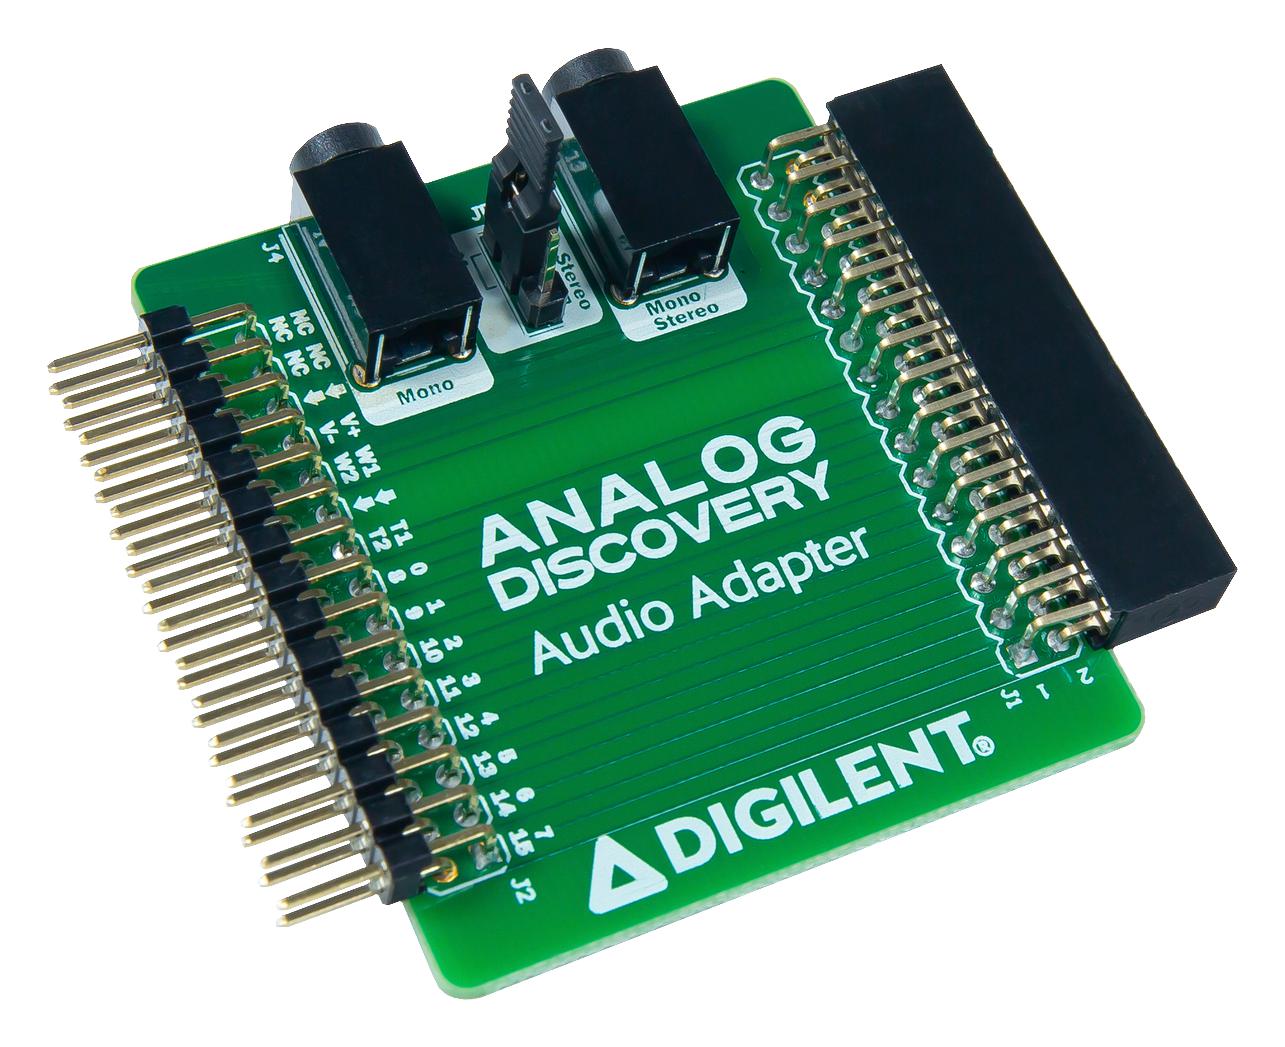 410-405 AUDIO ADAPTER, ANALOG DISCOVERY DIGILENT